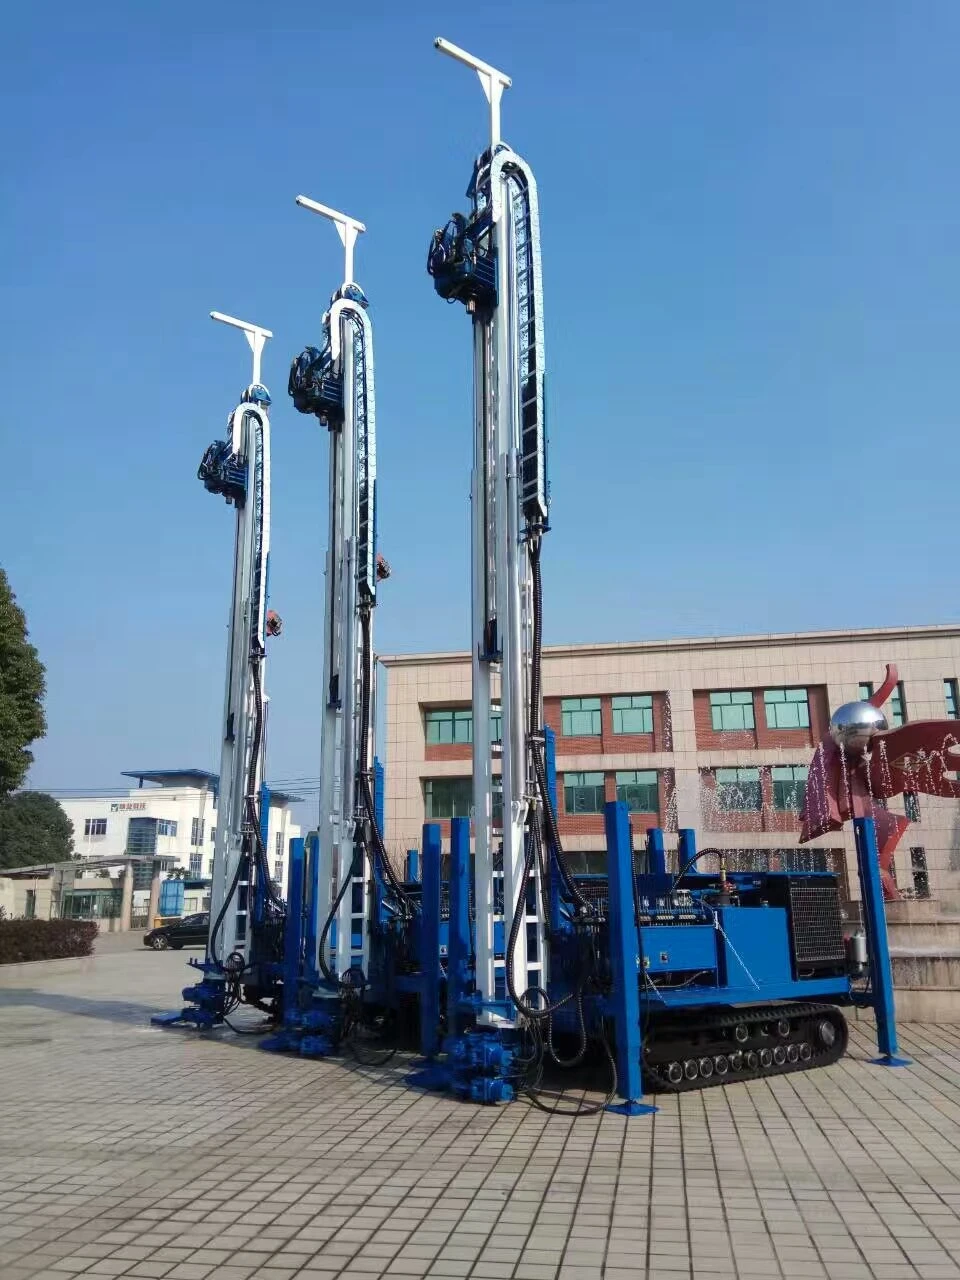 Ydl-200d Full Hydraulic Drilling Rig for Digging Water Well